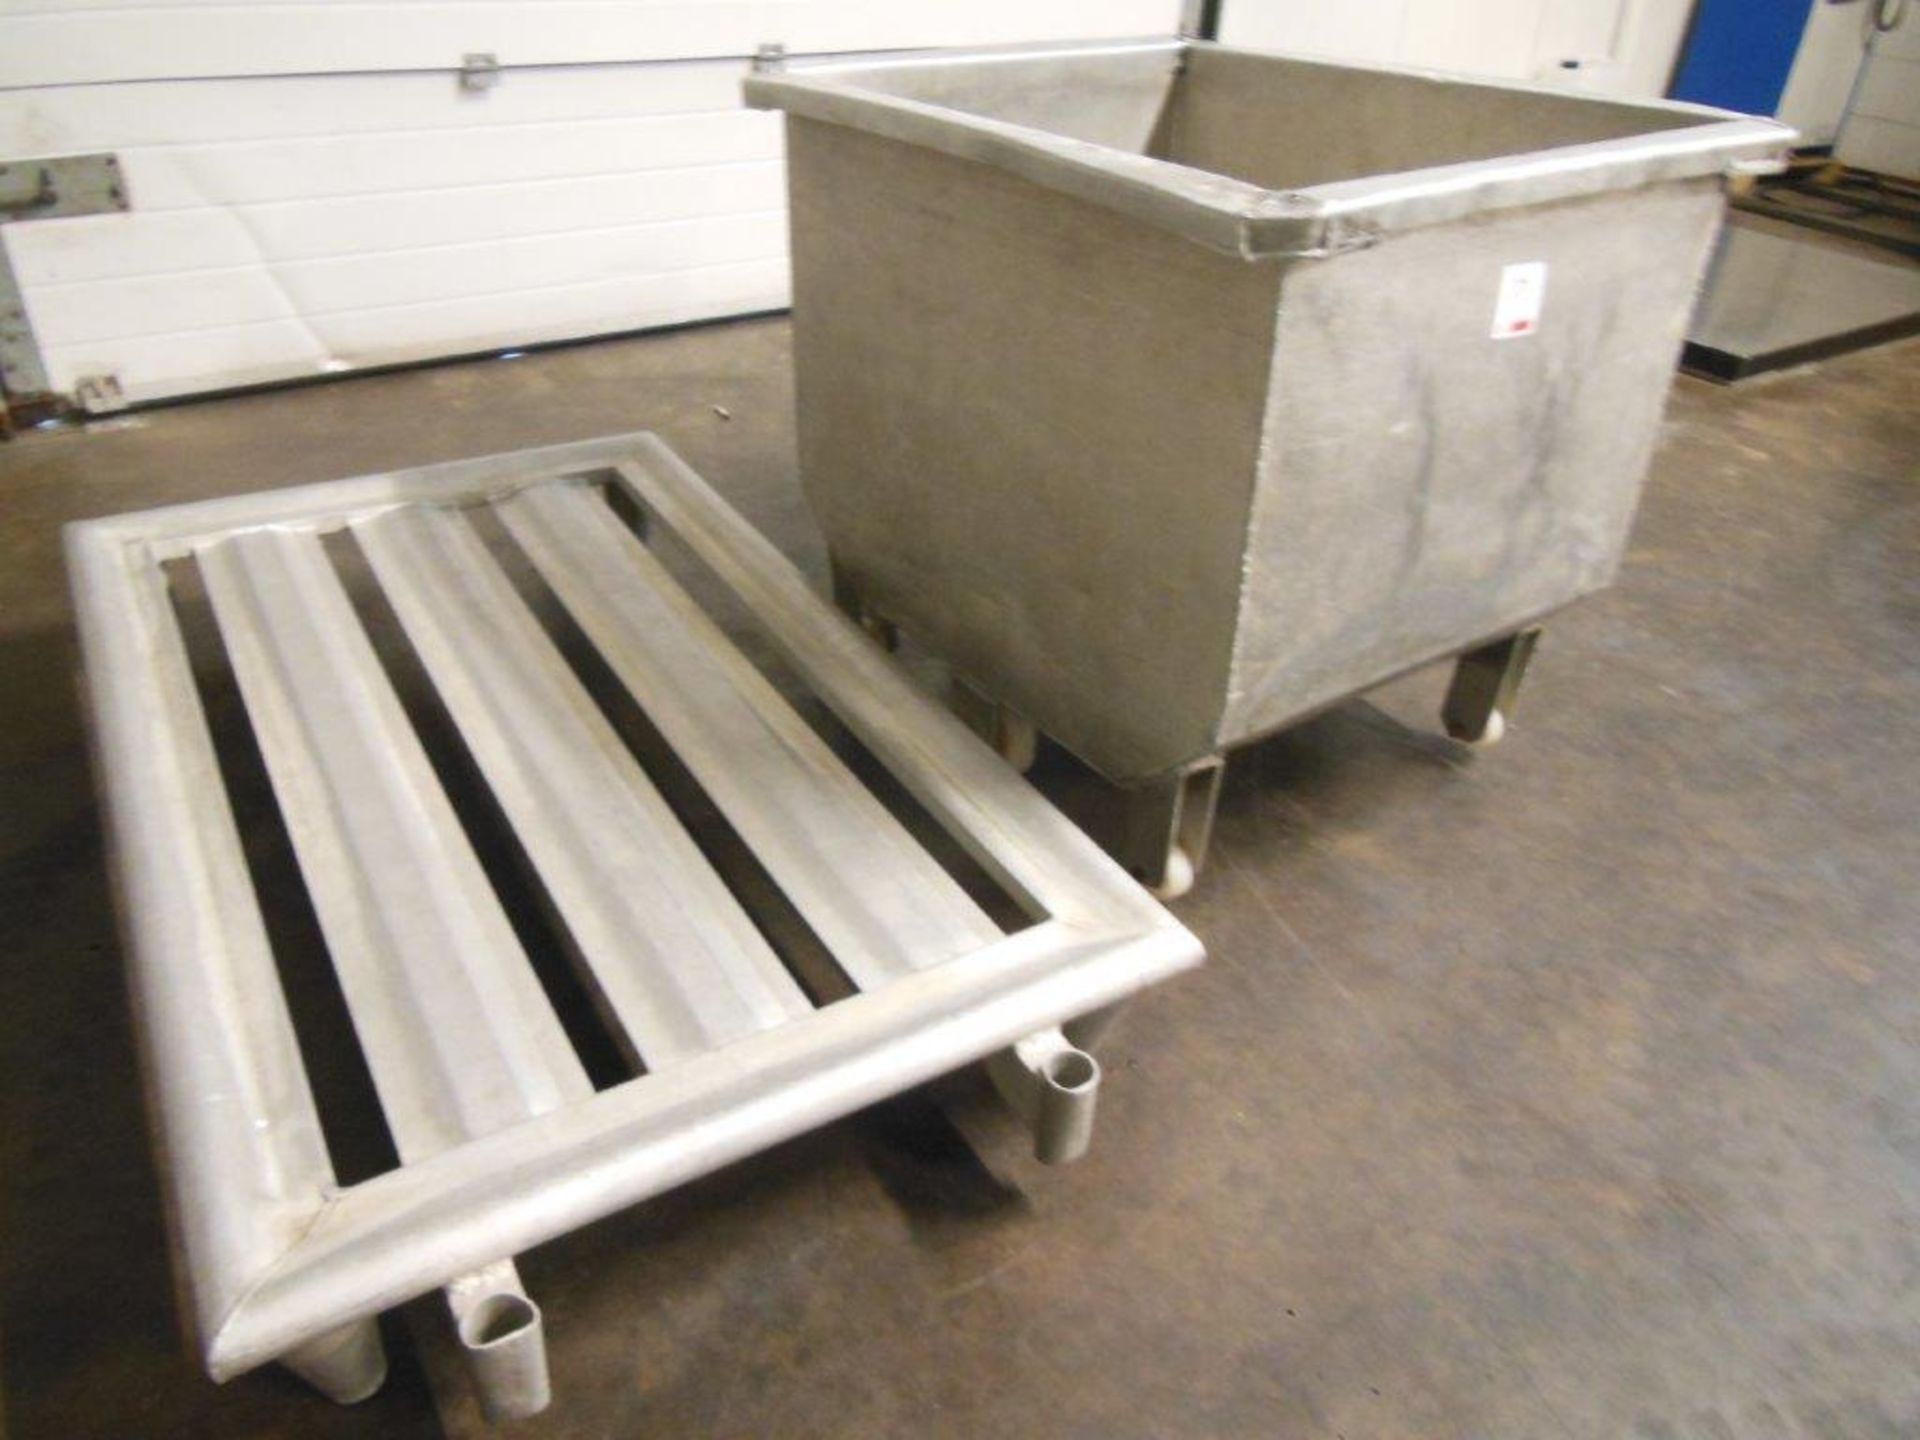 Aluminium pallet 1520 x 920mm and stainless steel mobile tank 900 x 715 x 730 mm - Image 2 of 3